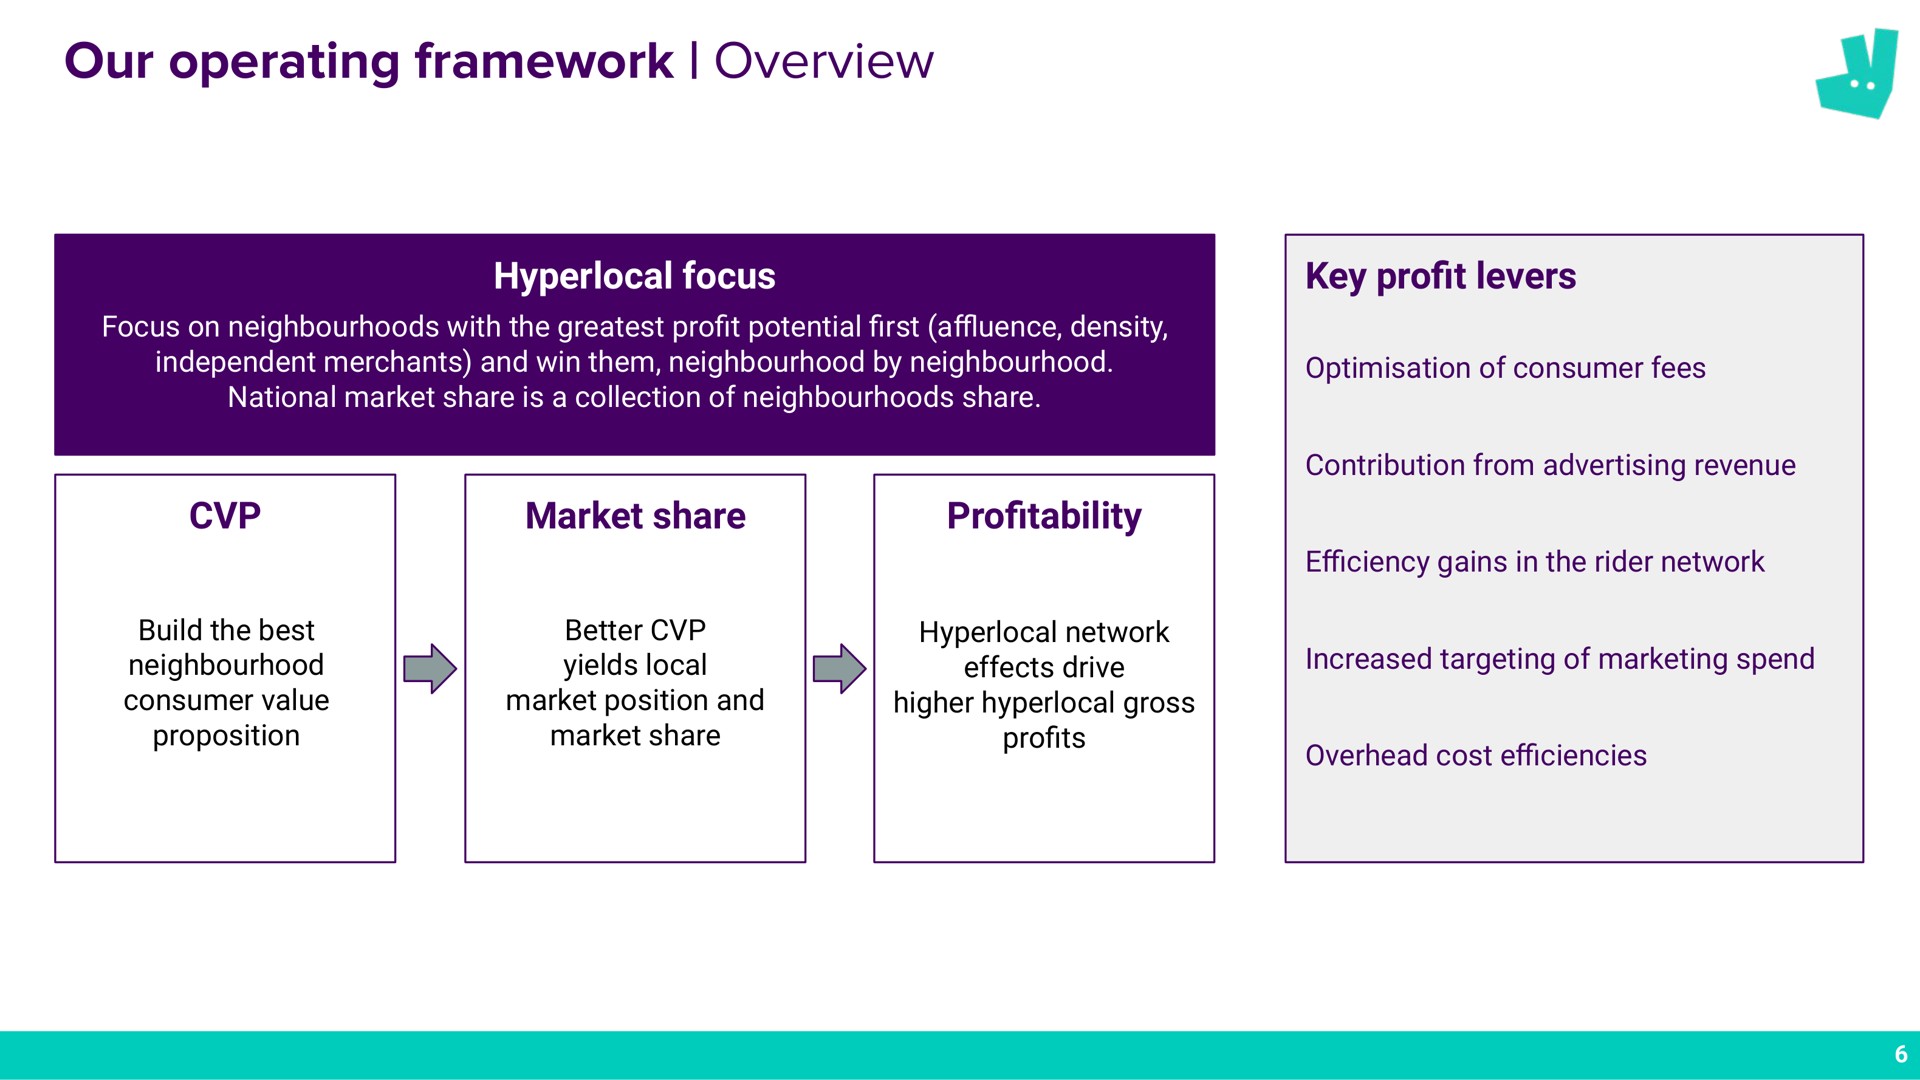 our operating framework overview a | Deliveroo